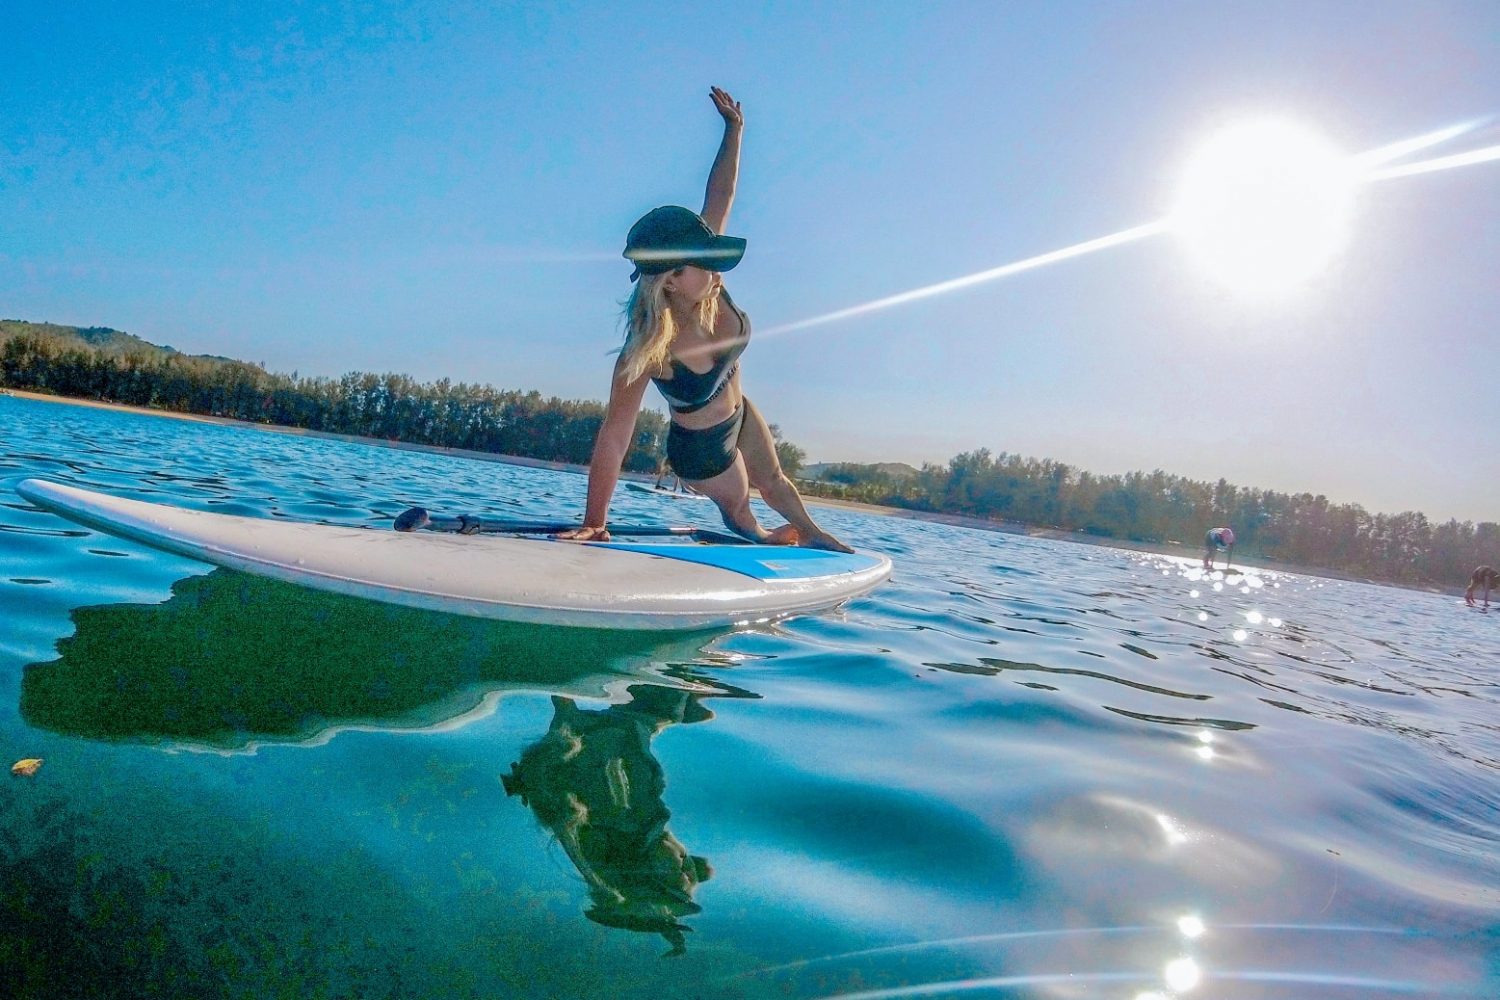 Best yoga class in phuket on a stand up paddle board - a sup yoga class you will not want to miss out